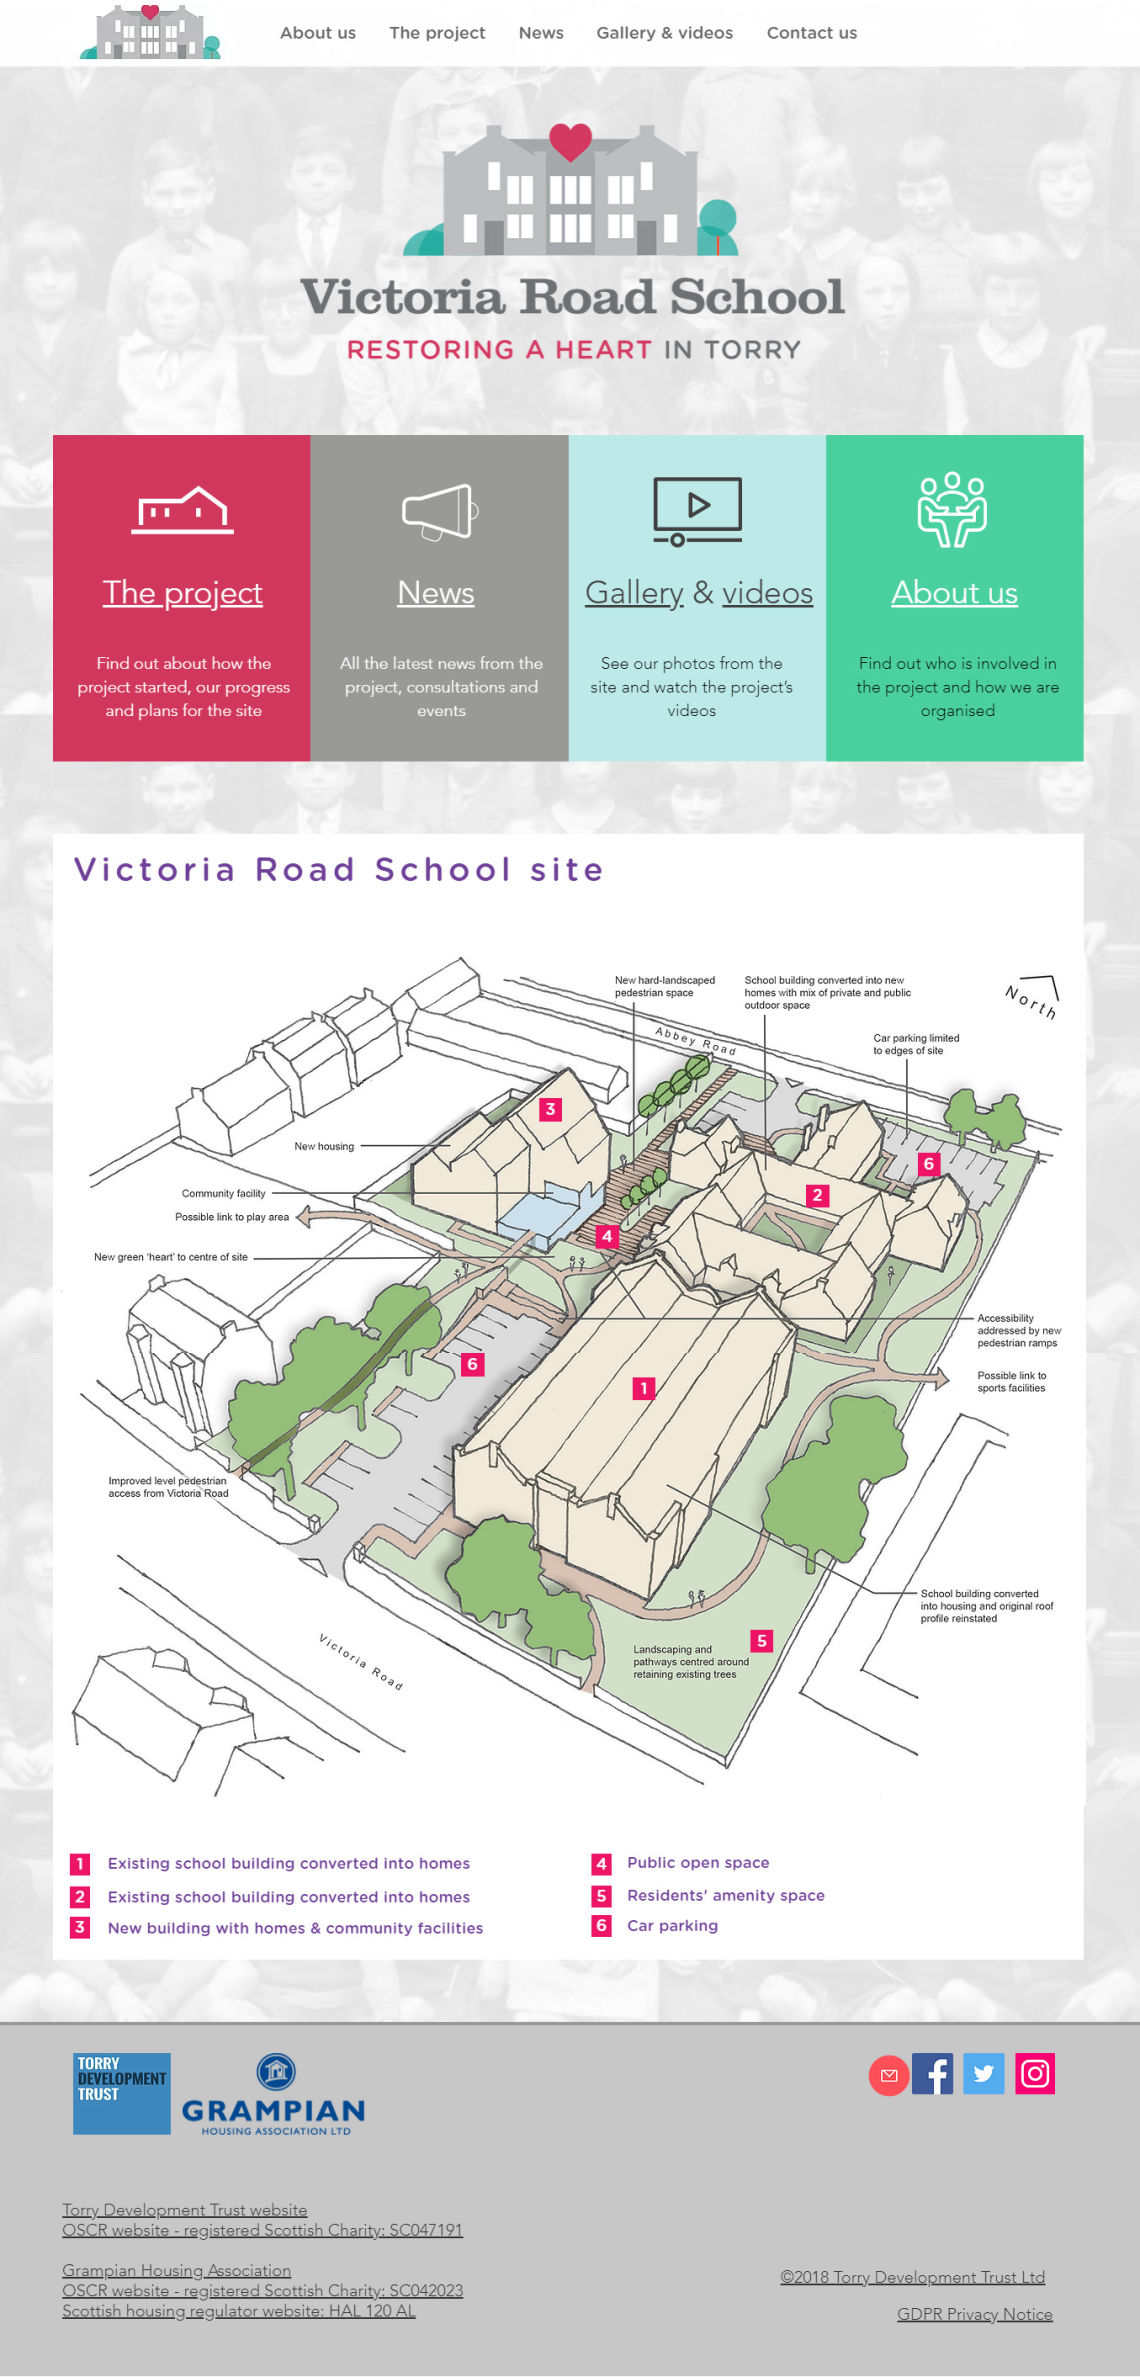 Homepage of the Victoria Road School regeneration project website extended by Doric Design